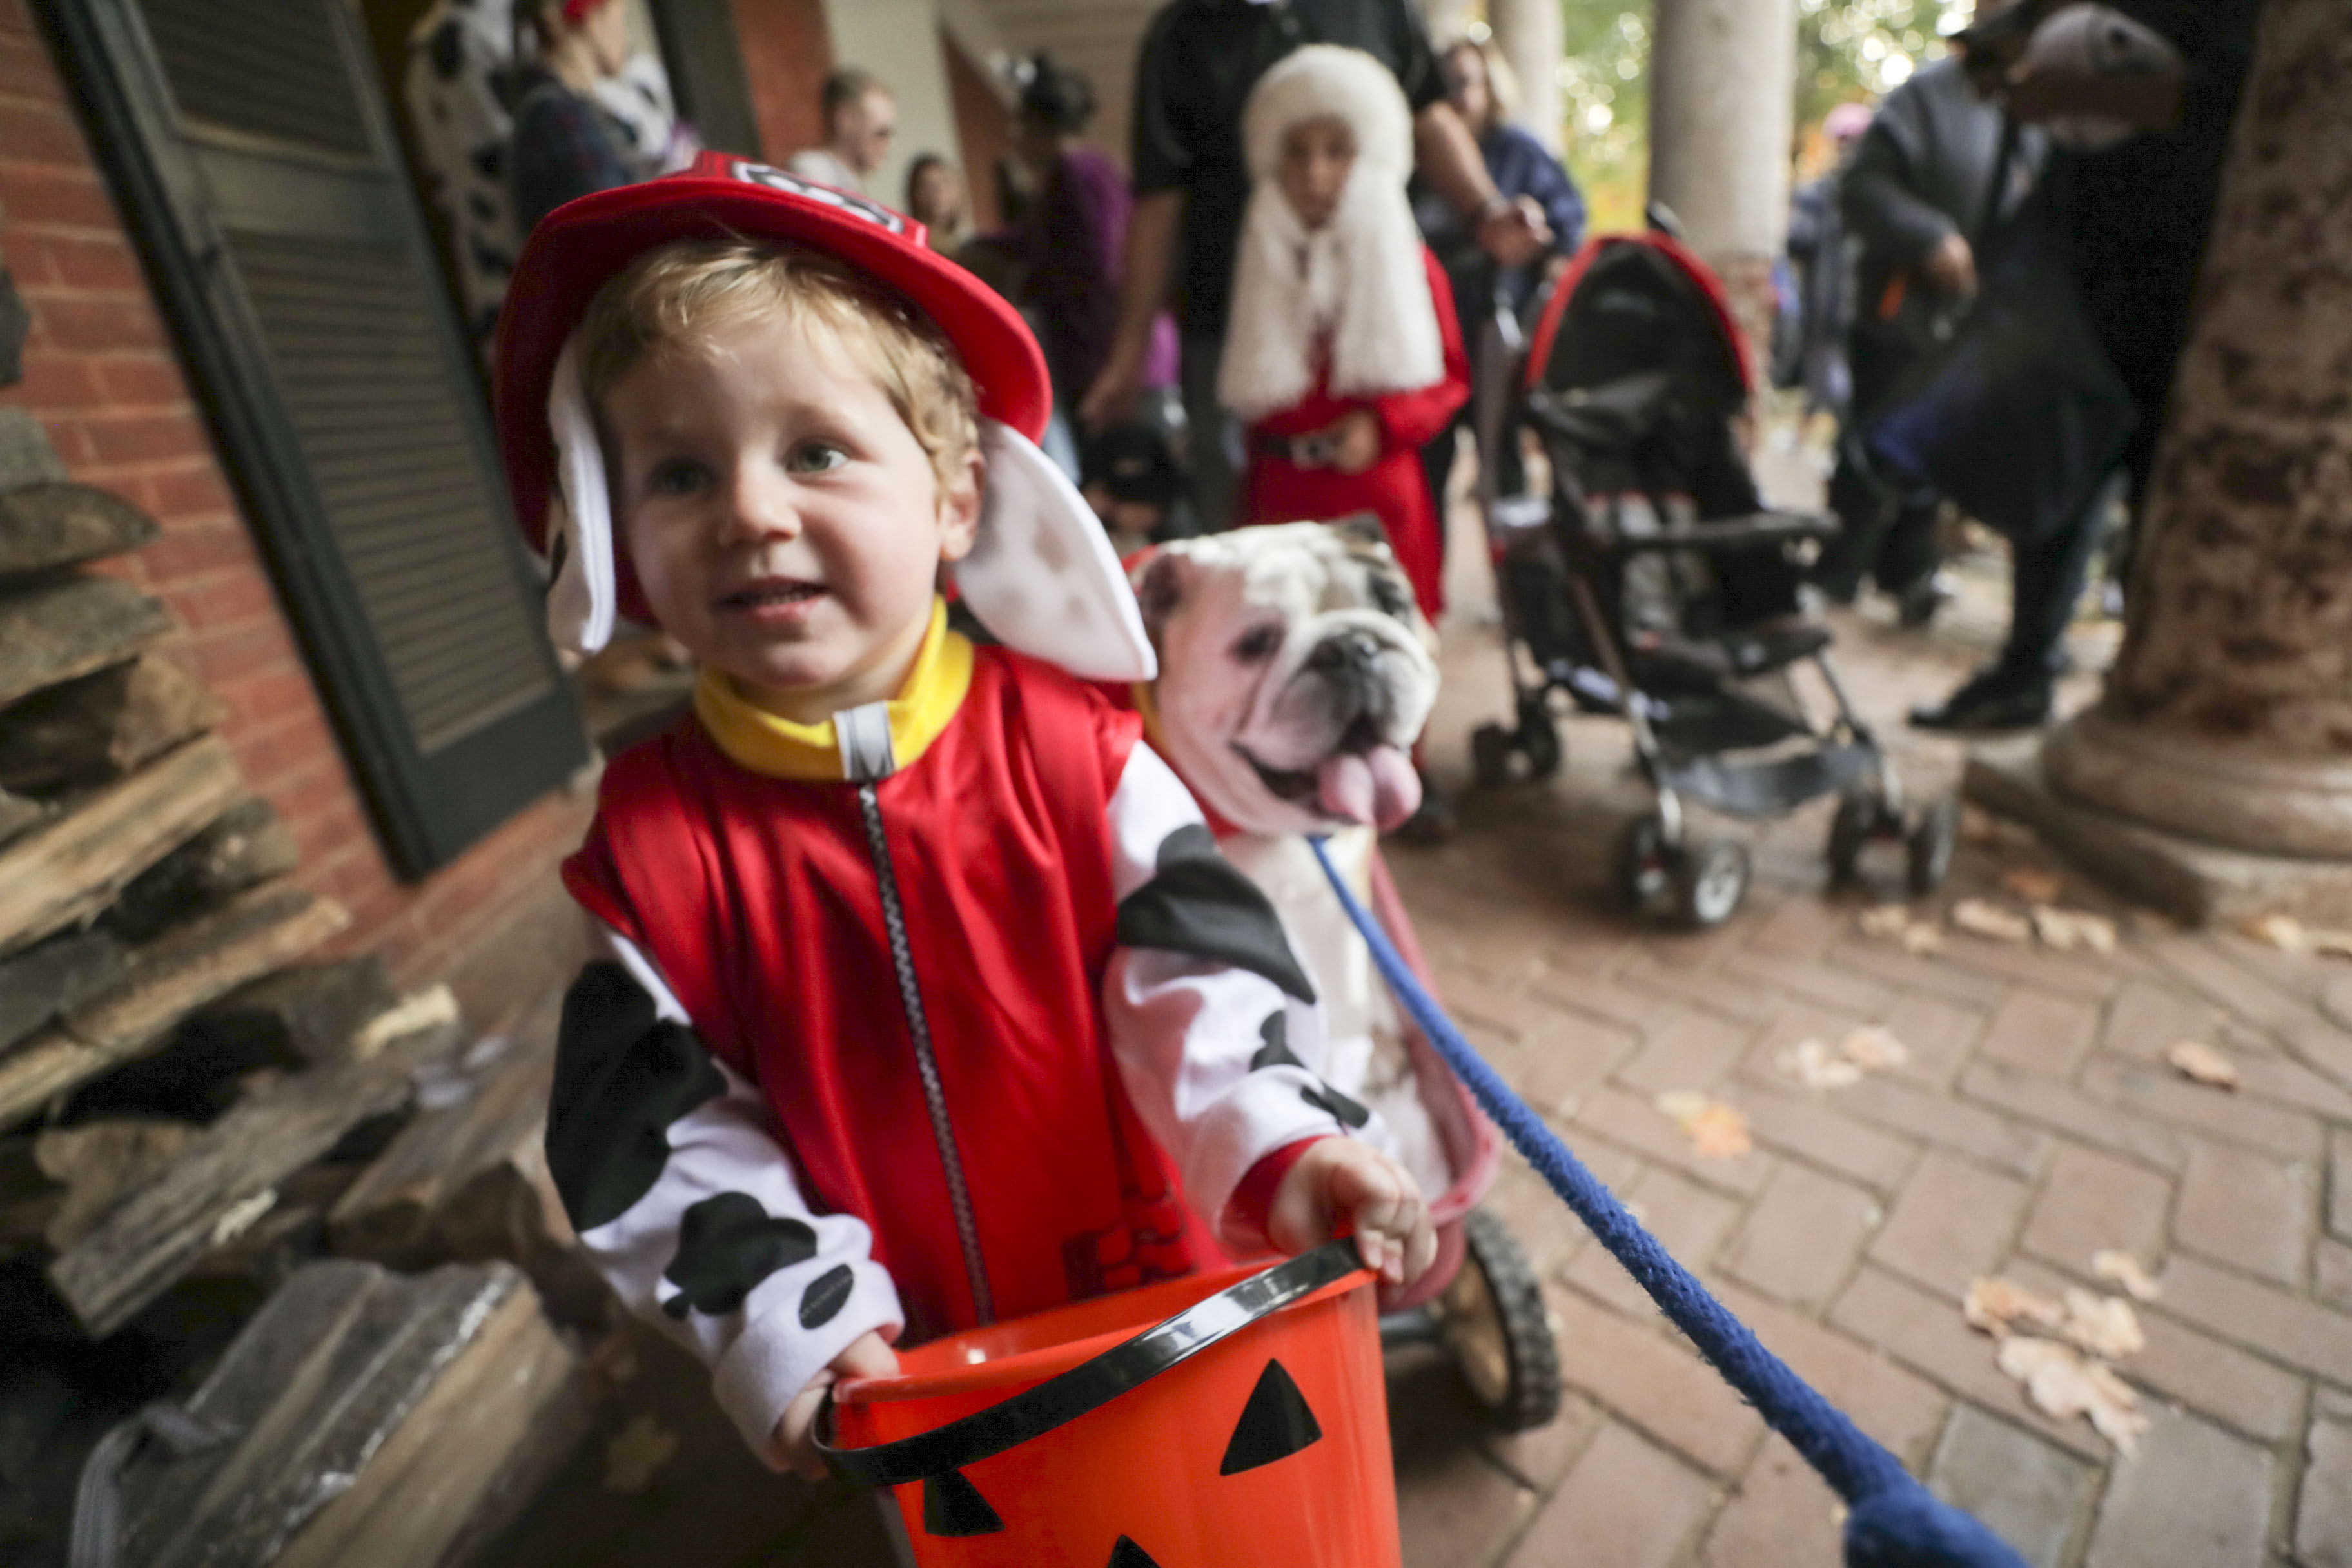 Little kid dressed up as a Dalmatian trick or treating 